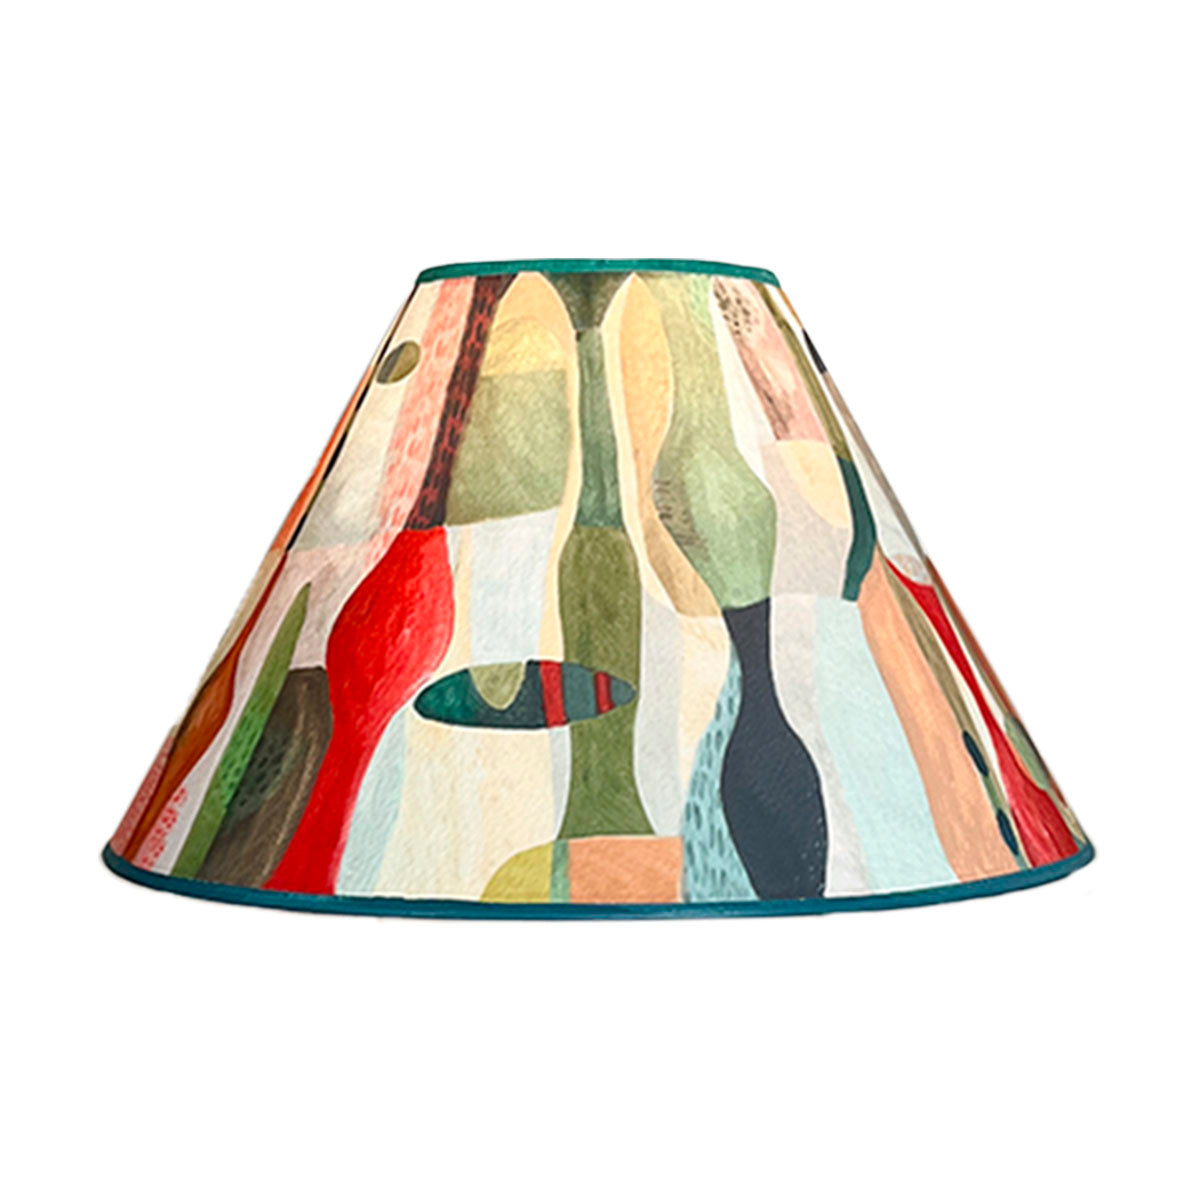 Janna Ugone & Co Lamp Shades Medium Conical Lamp Shade in Riviera in Poppy